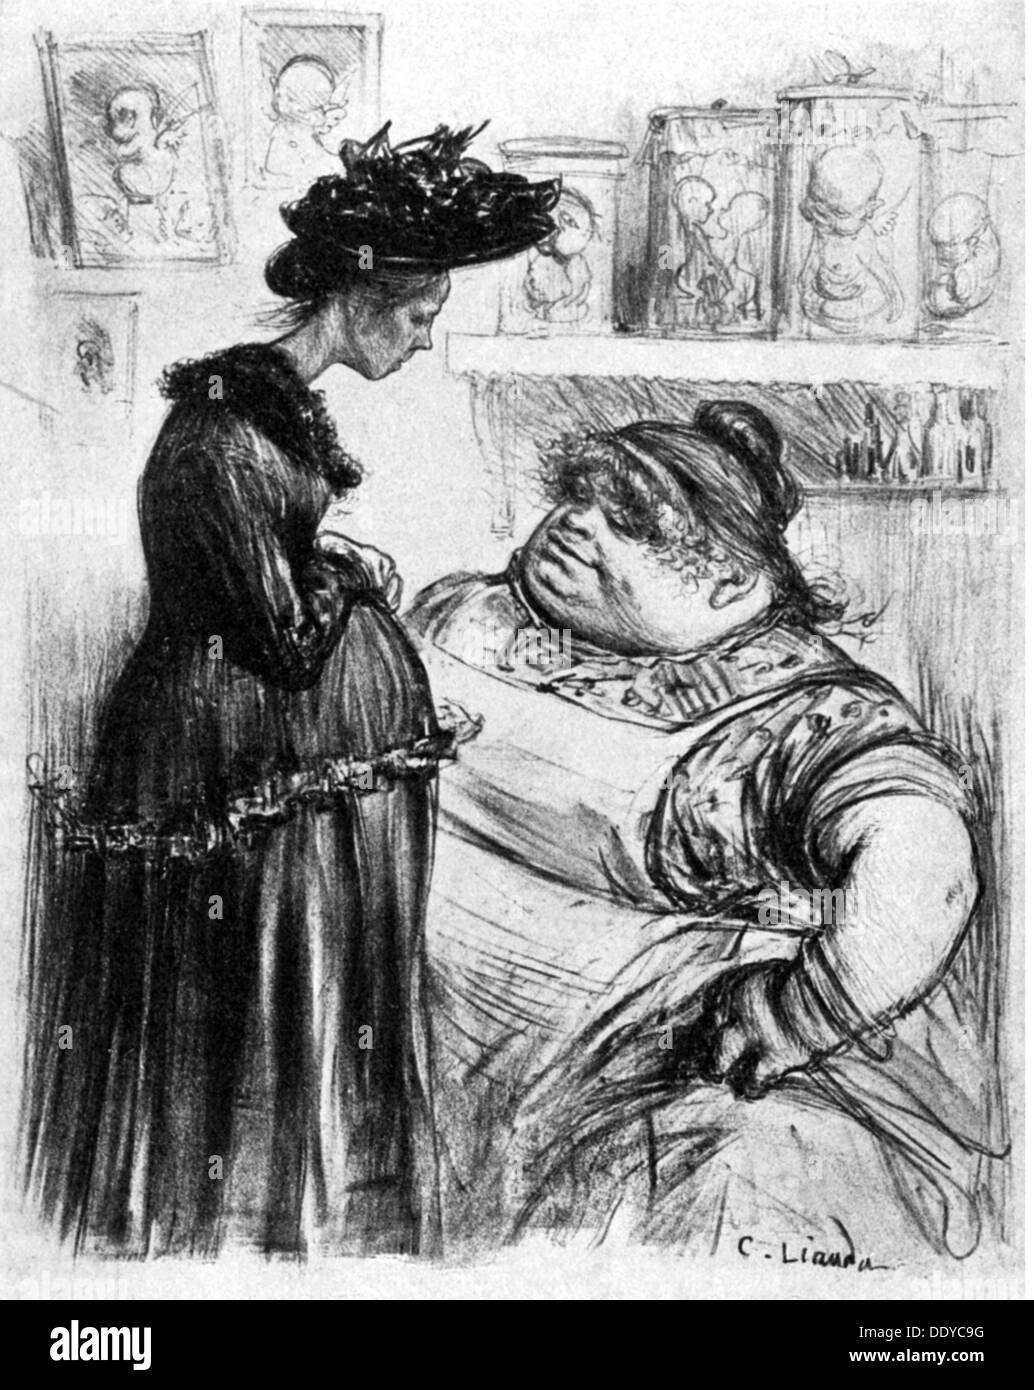 medicine,birth / gynecology,pregnant woman at a backstreet abortionist,by Charles Leandre(1862 - 1934),lithograph,19th century,19th century,graphic,graphics,caricature,caricatures,humor,humour,satire,half length,standing,pregnant woman,pregnant women,pregnancy,gestation,gravidity,pregnancies,sitting,sit,conversation,conversations,talks,talking,talk,illegal,help,out of desperation,misery,quackery,quack,a quack doctor,abortion,abortions,termination,emergency,emergencies,medicine,medicines,birth,births,gynecology,gyna,Additional-Rights-Clearences-Not Available Stock Photo